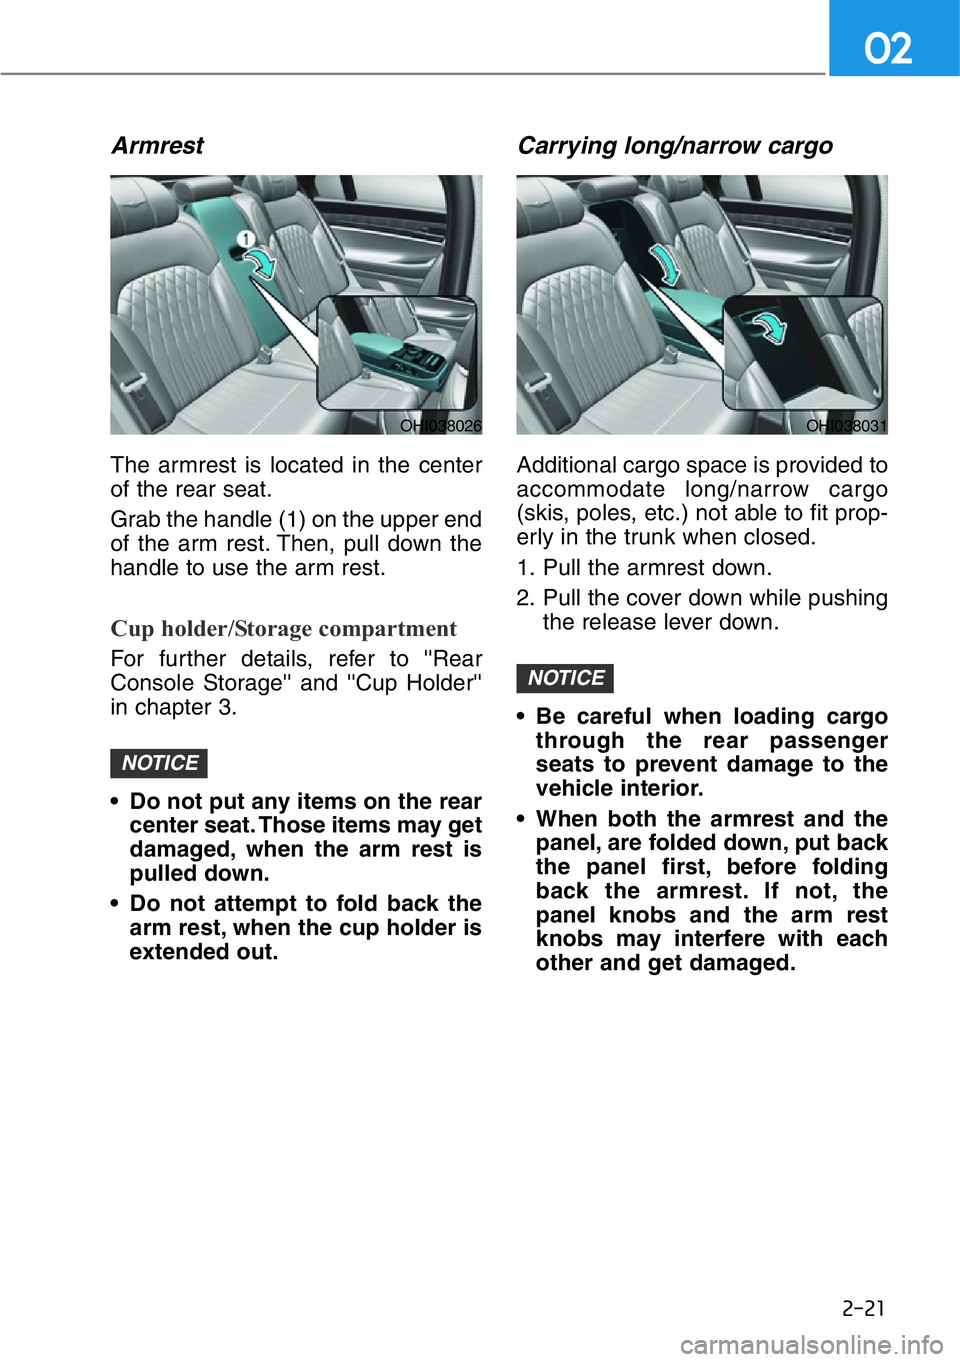 GENESIS G90 2021  Owners Manual 2-21
02
Armrest
The armrest is located in the center
of the rear seat.
Grab the handle (1) on the upper end
of the arm rest. Then, pull down the
handle to use the arm rest.
Cup holder/Storage compartm